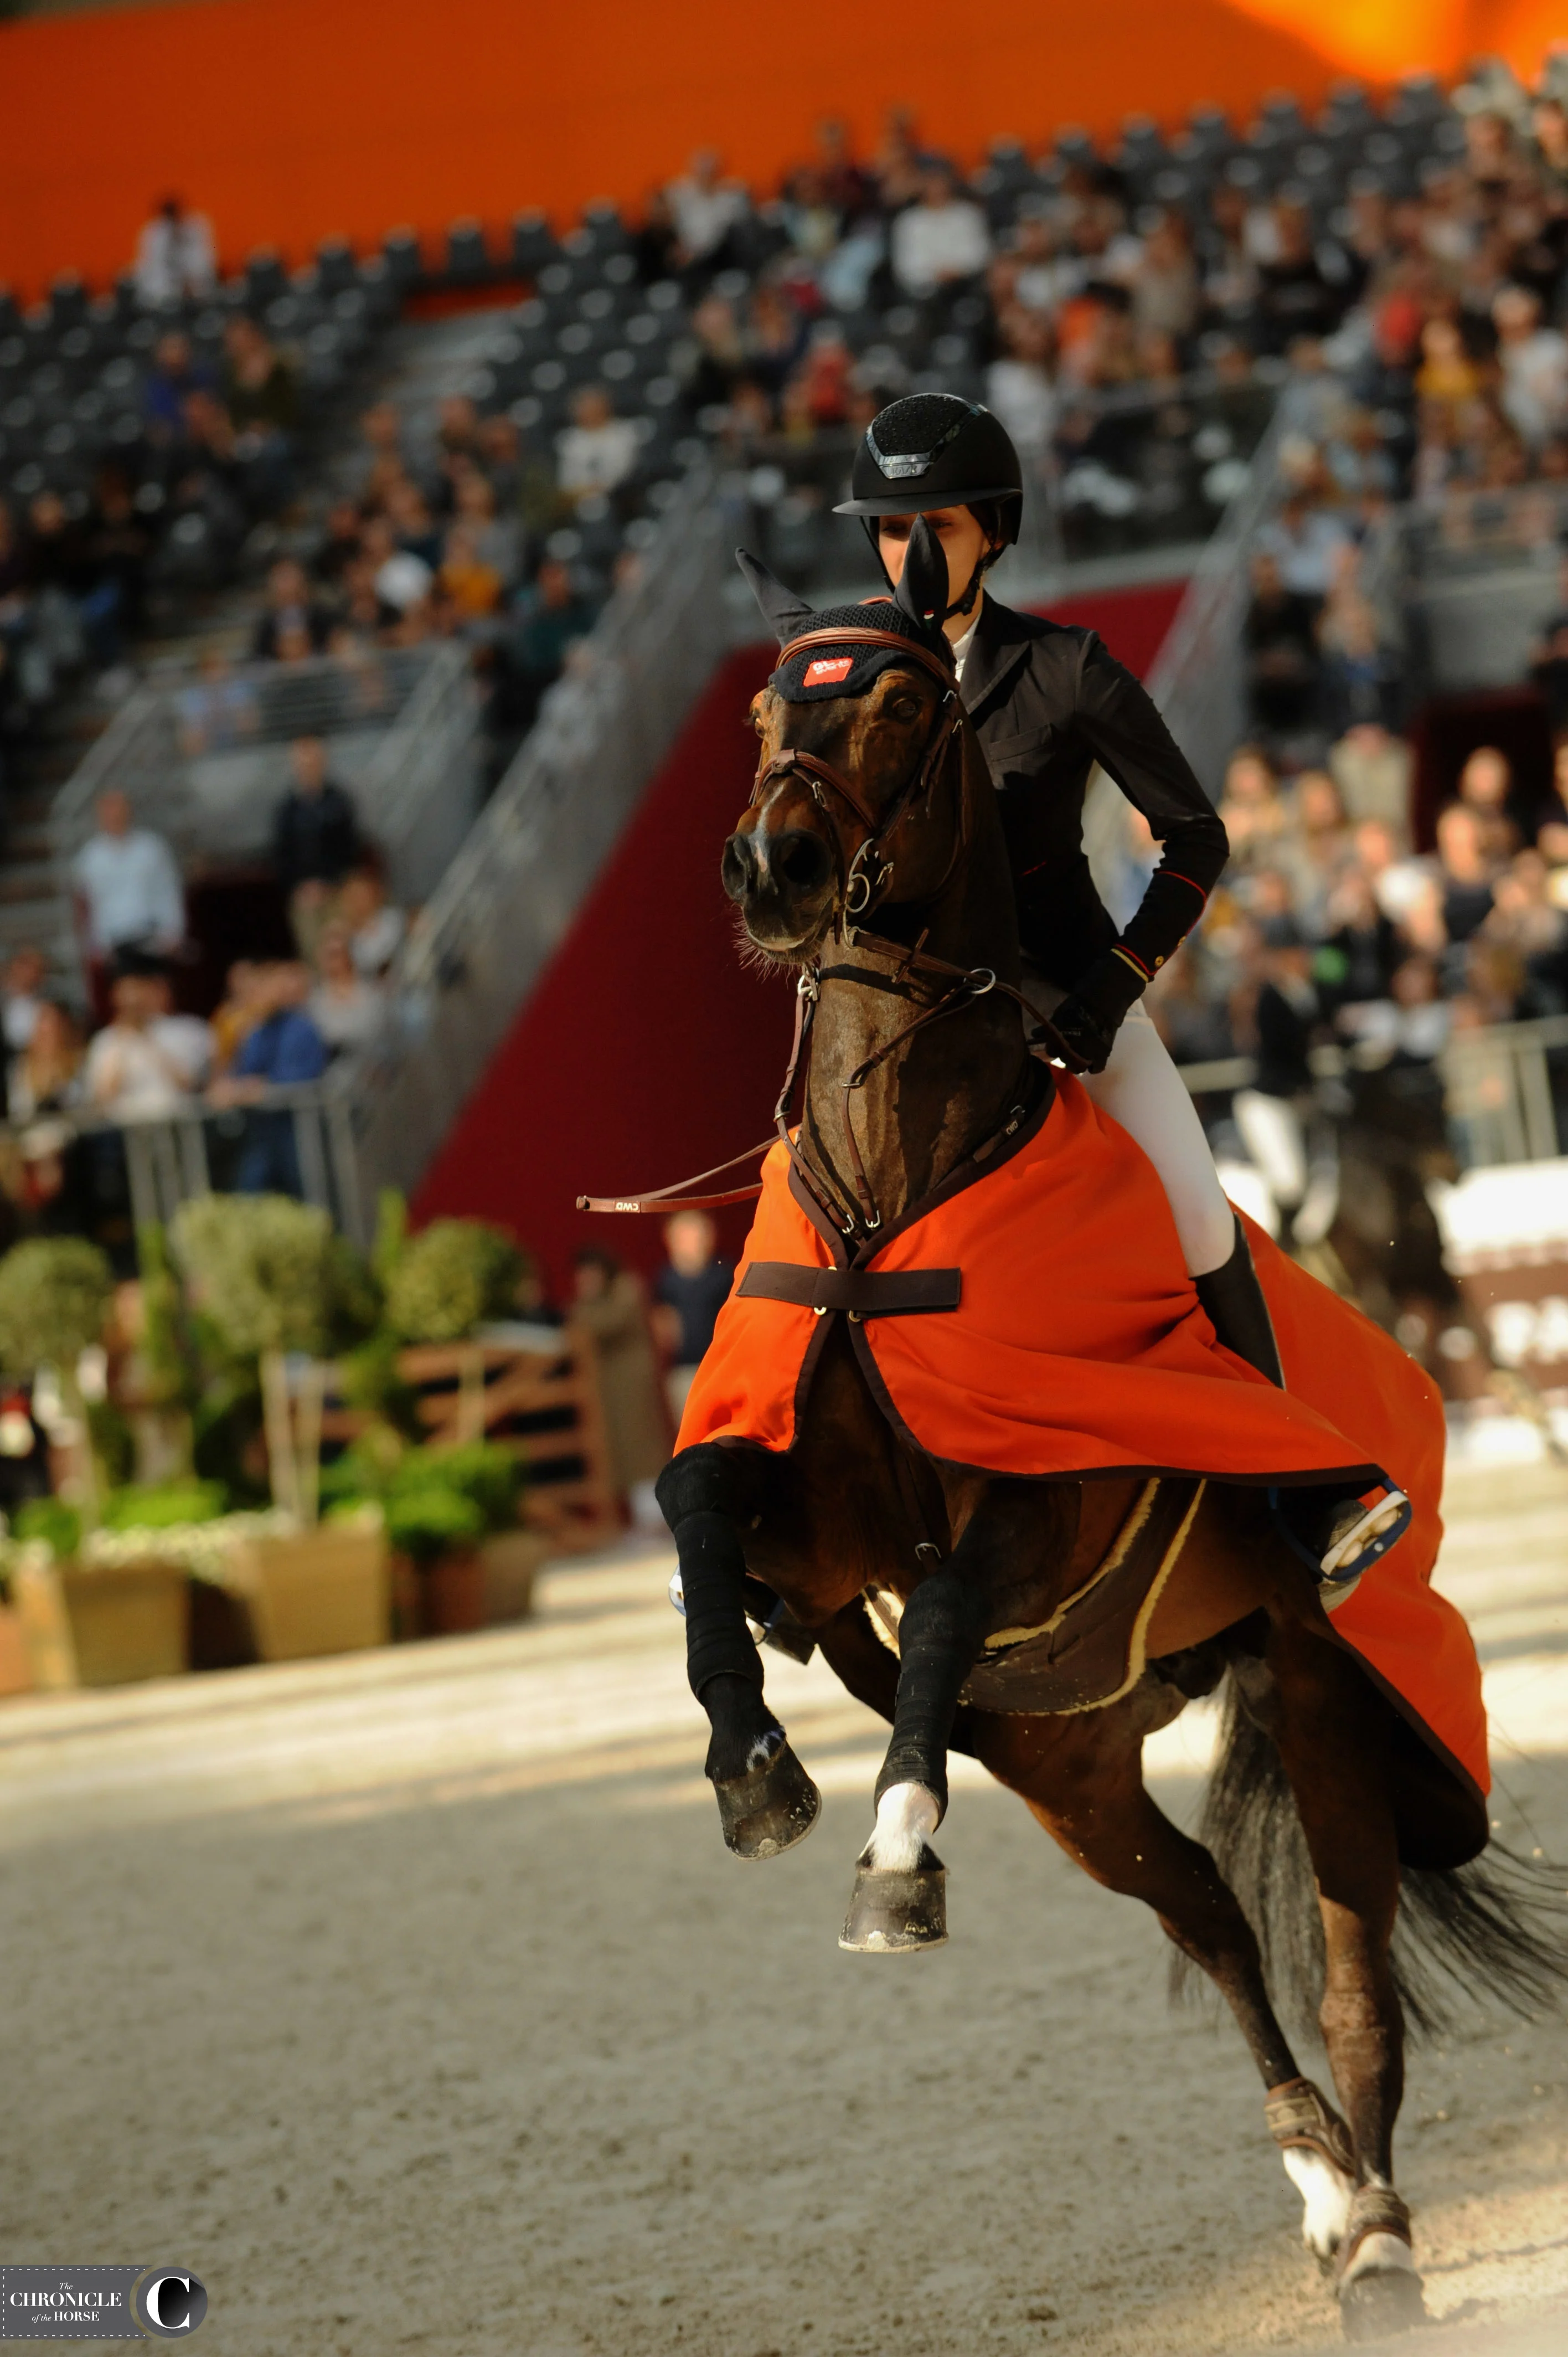 First look at the Hermès Horse exhibition